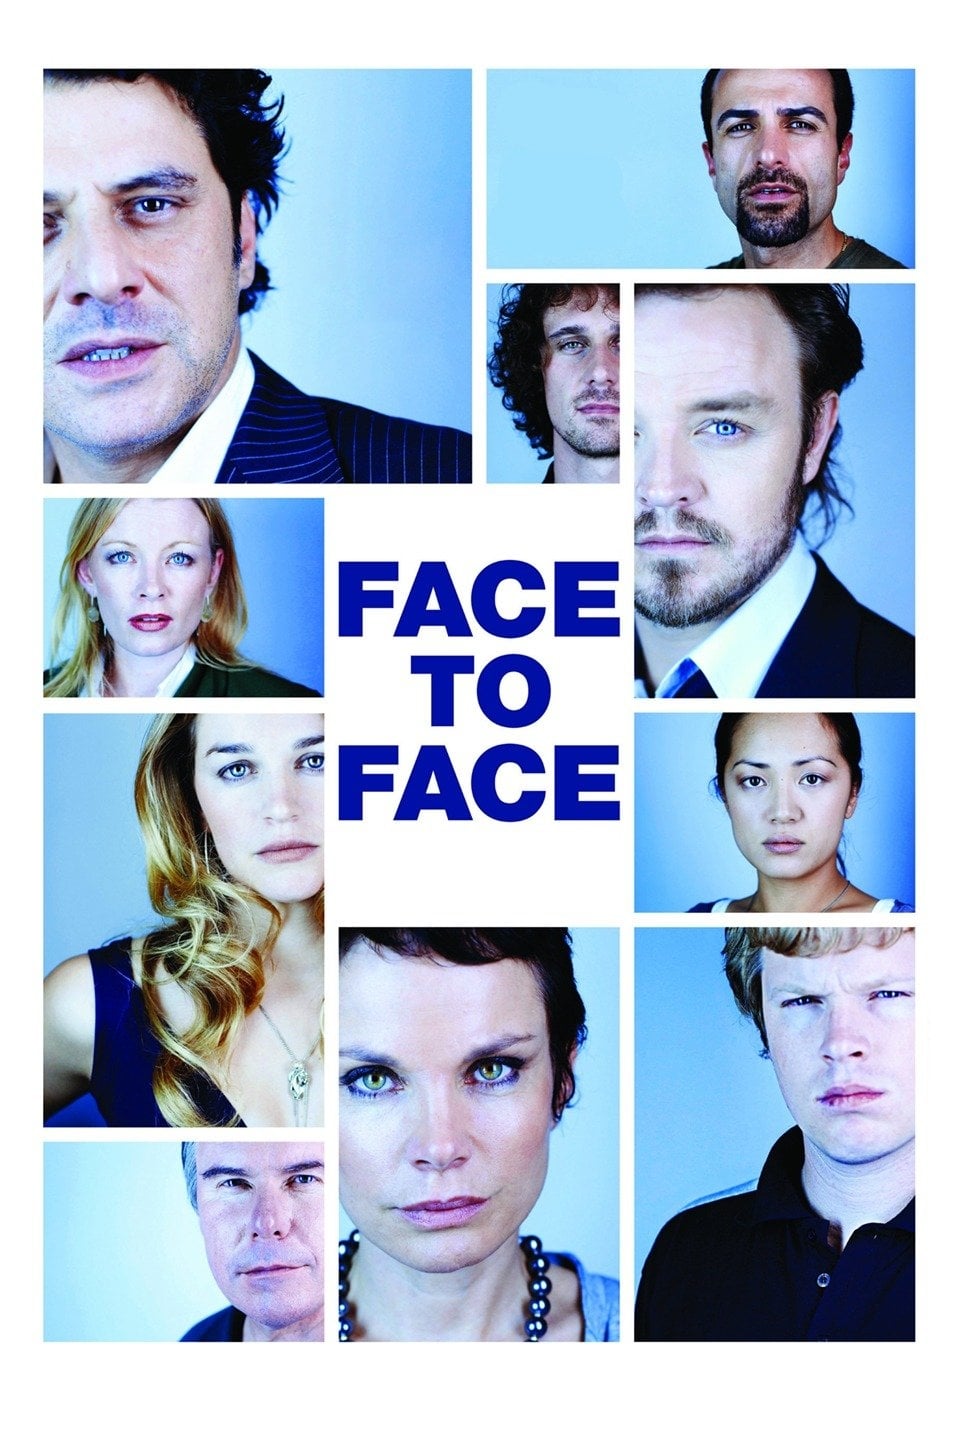 Face to Face (2011)